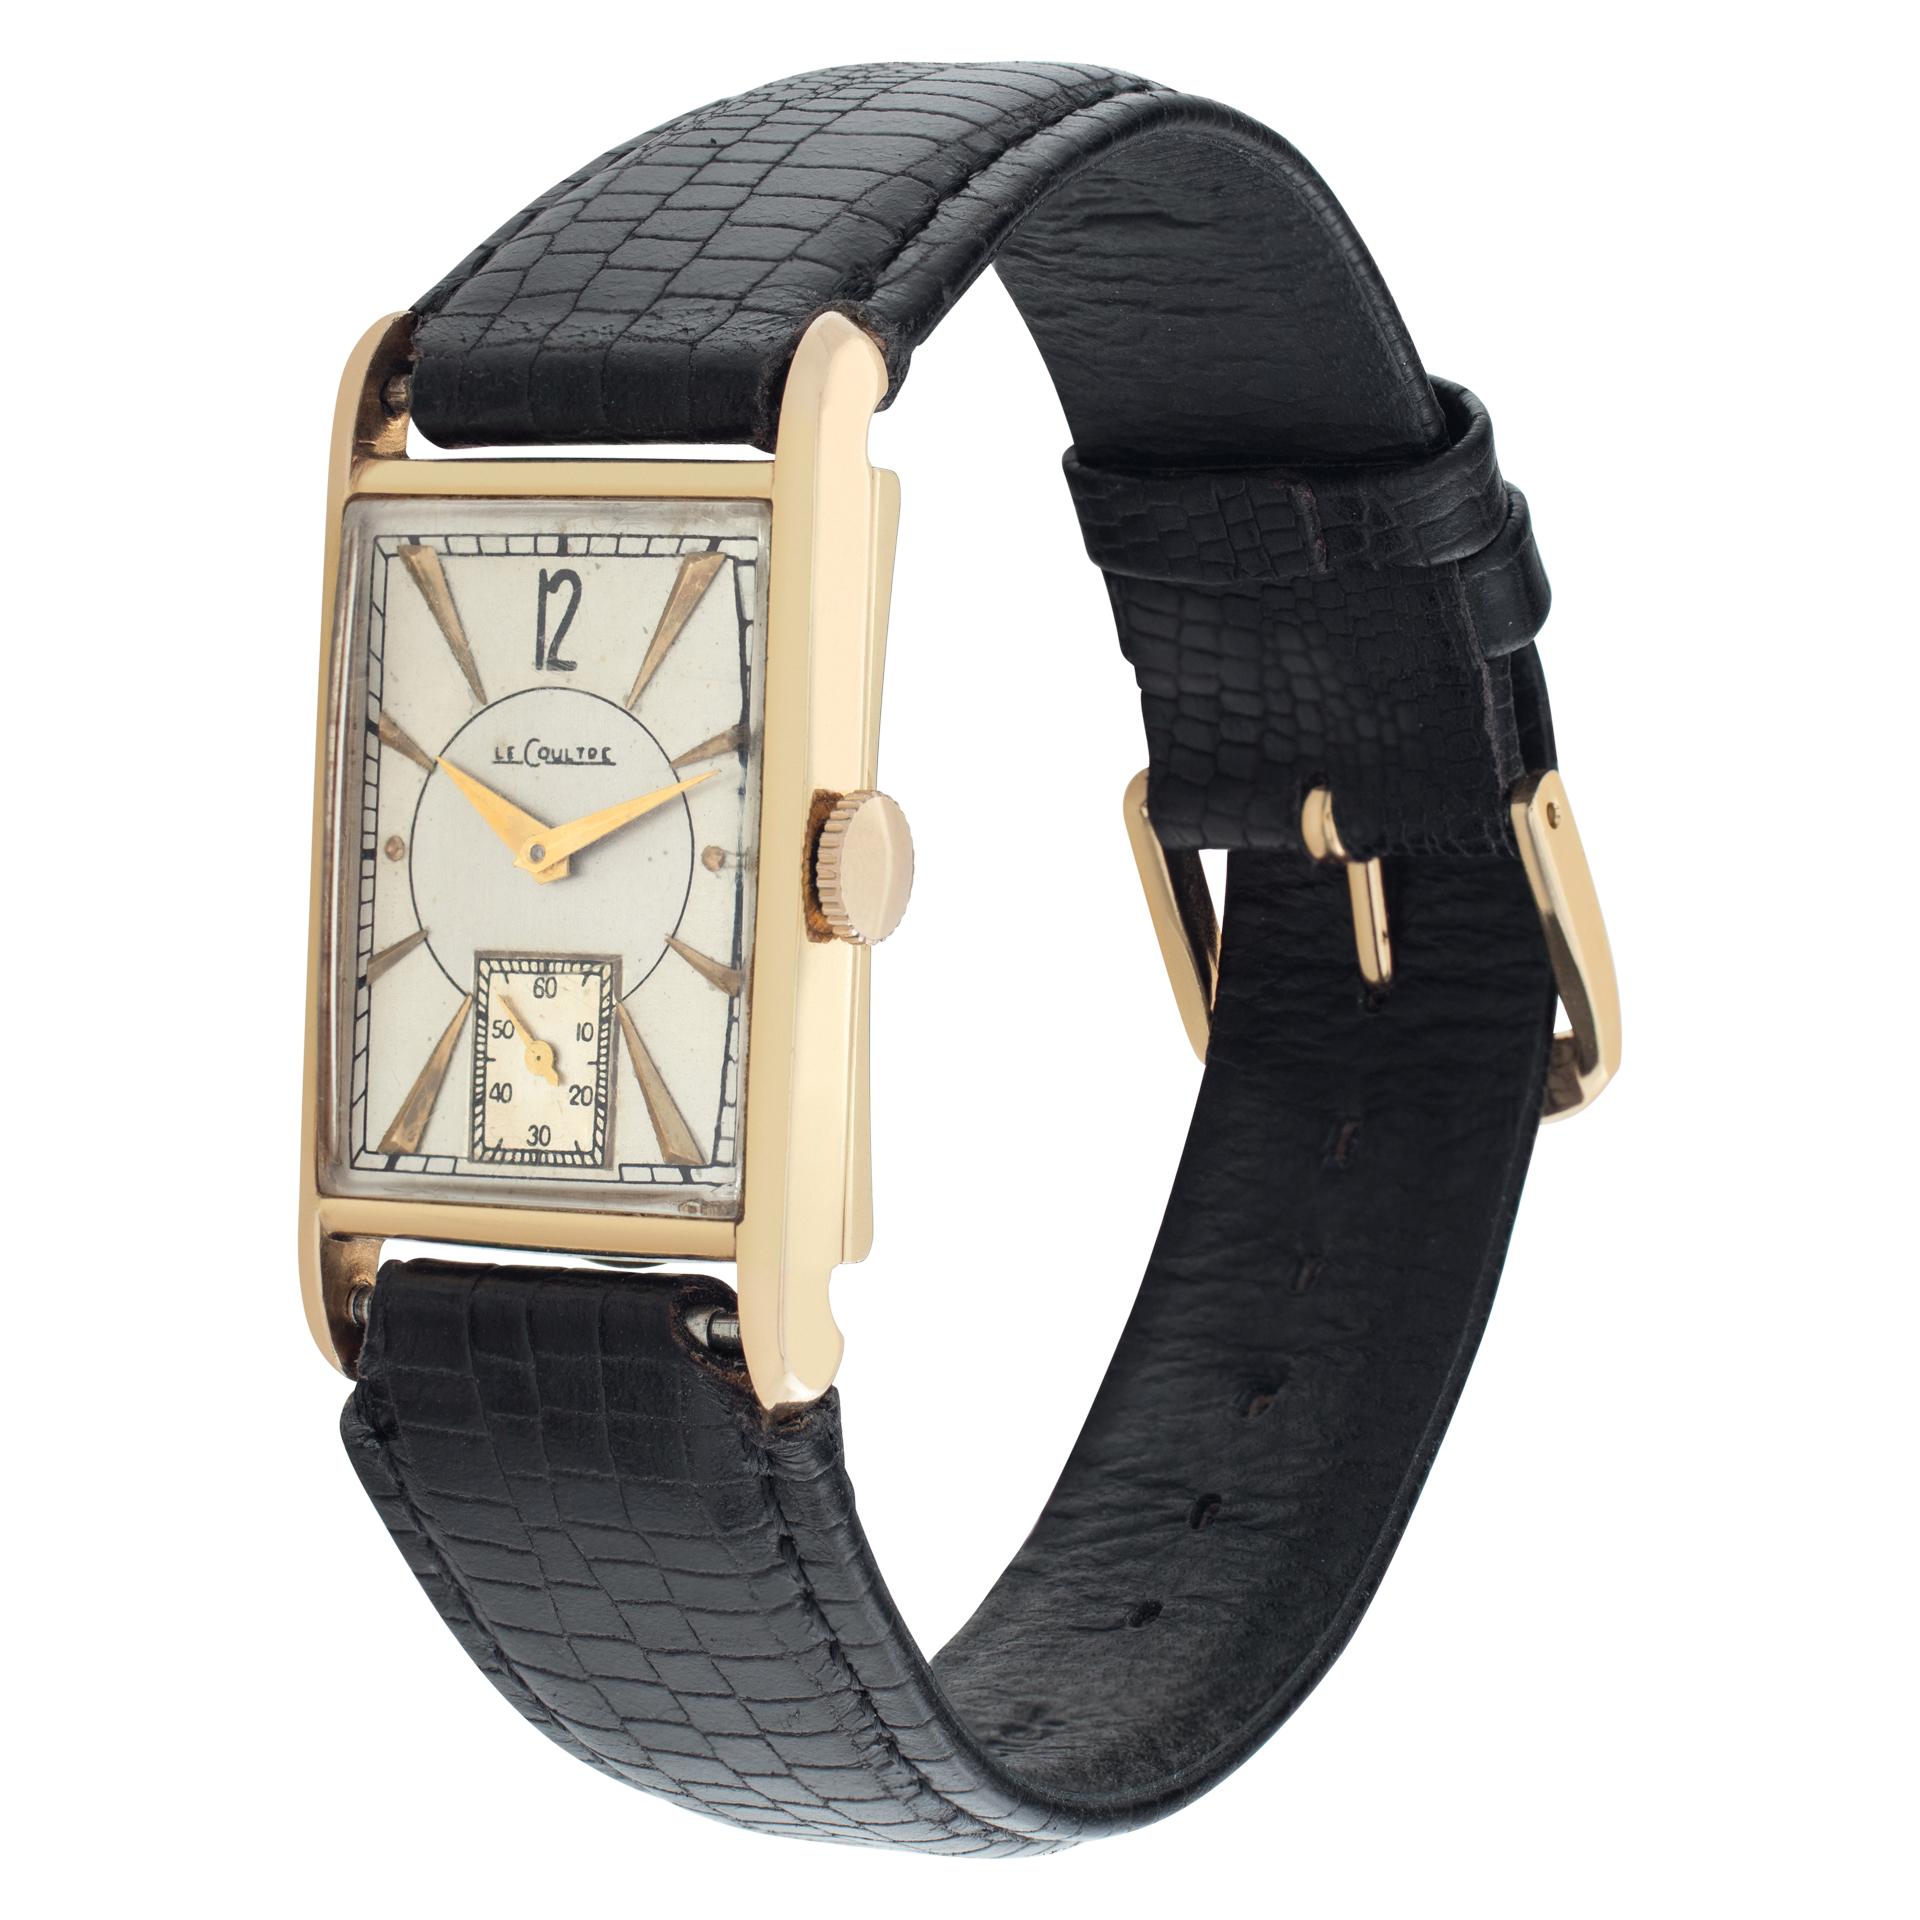 LeCoultre Classic in 14k on leather strap. Manual w/ subseconds. 20 mm x 27 mm case size. Fine Pre-owned LeCoultre Watch. Certified preowned Vintage LeCoultre Classic watch is made out of yellow gold on a Brown Leather strap with a tang buckle. This